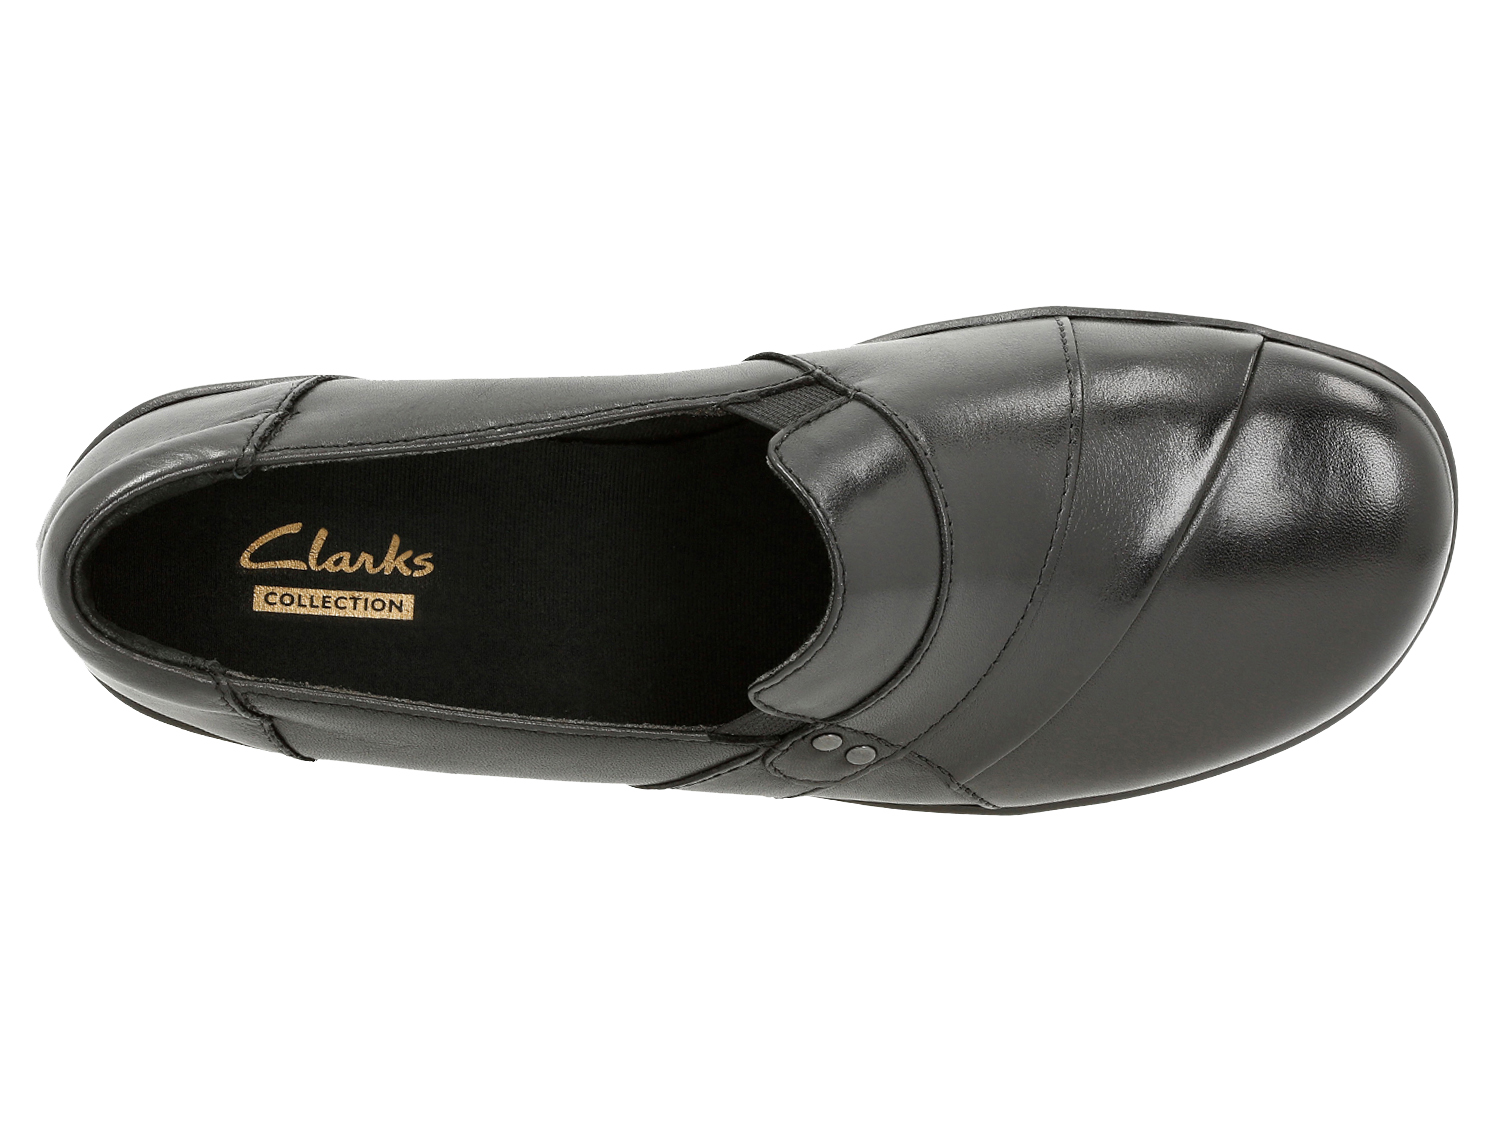 Details about   Clarks Authentic Black May Marigold Slip On Leather Loafer Comfort Shoes New